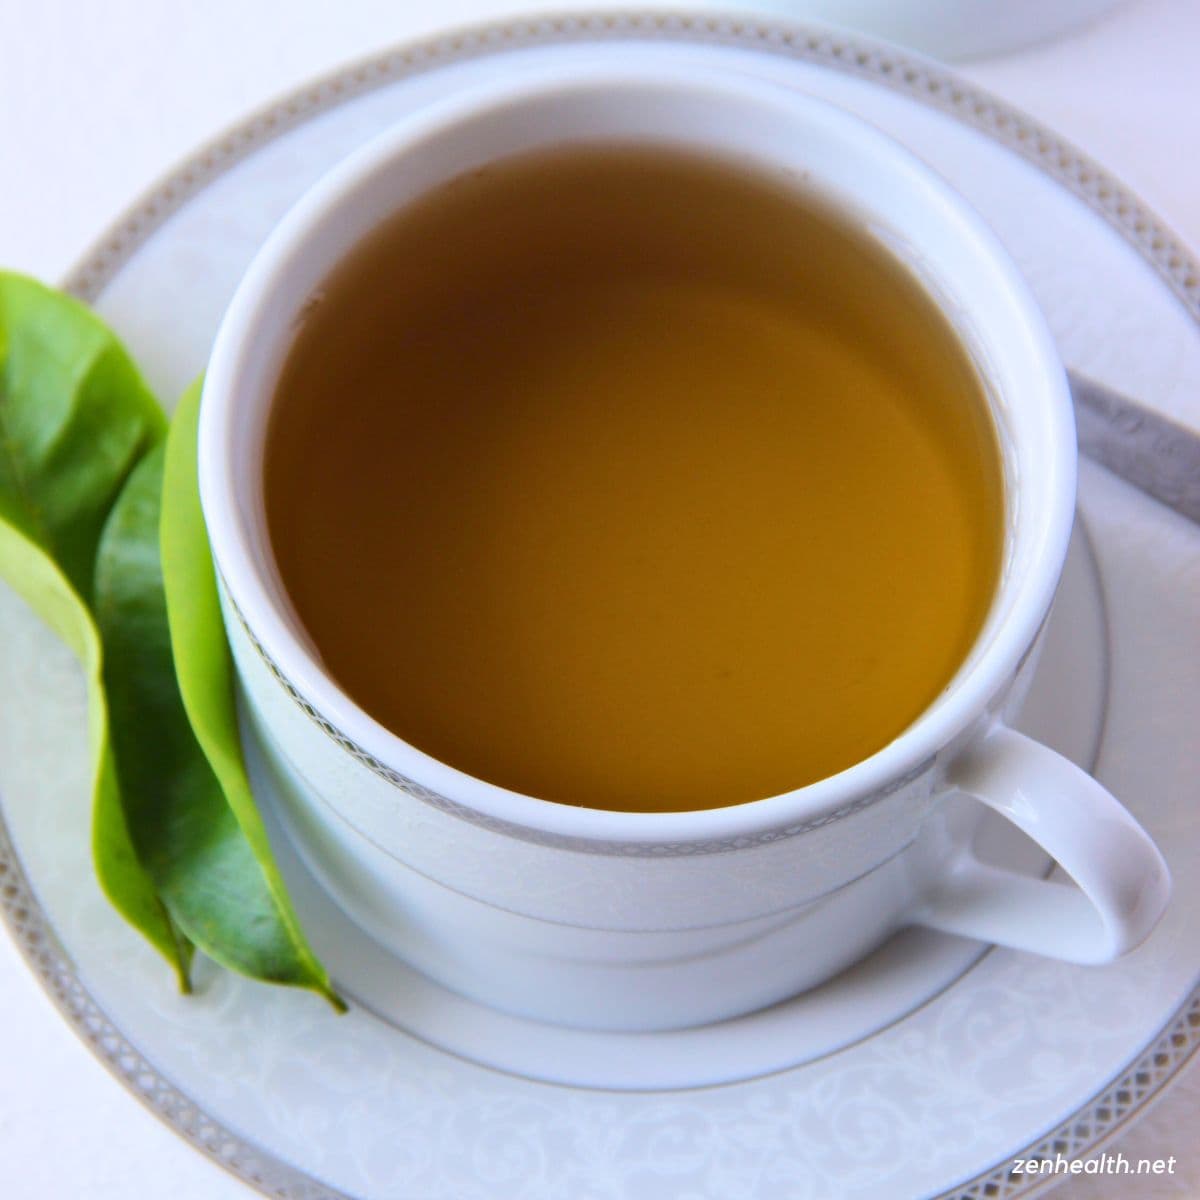 soursop tea in a teacup with soursop leaves on the side